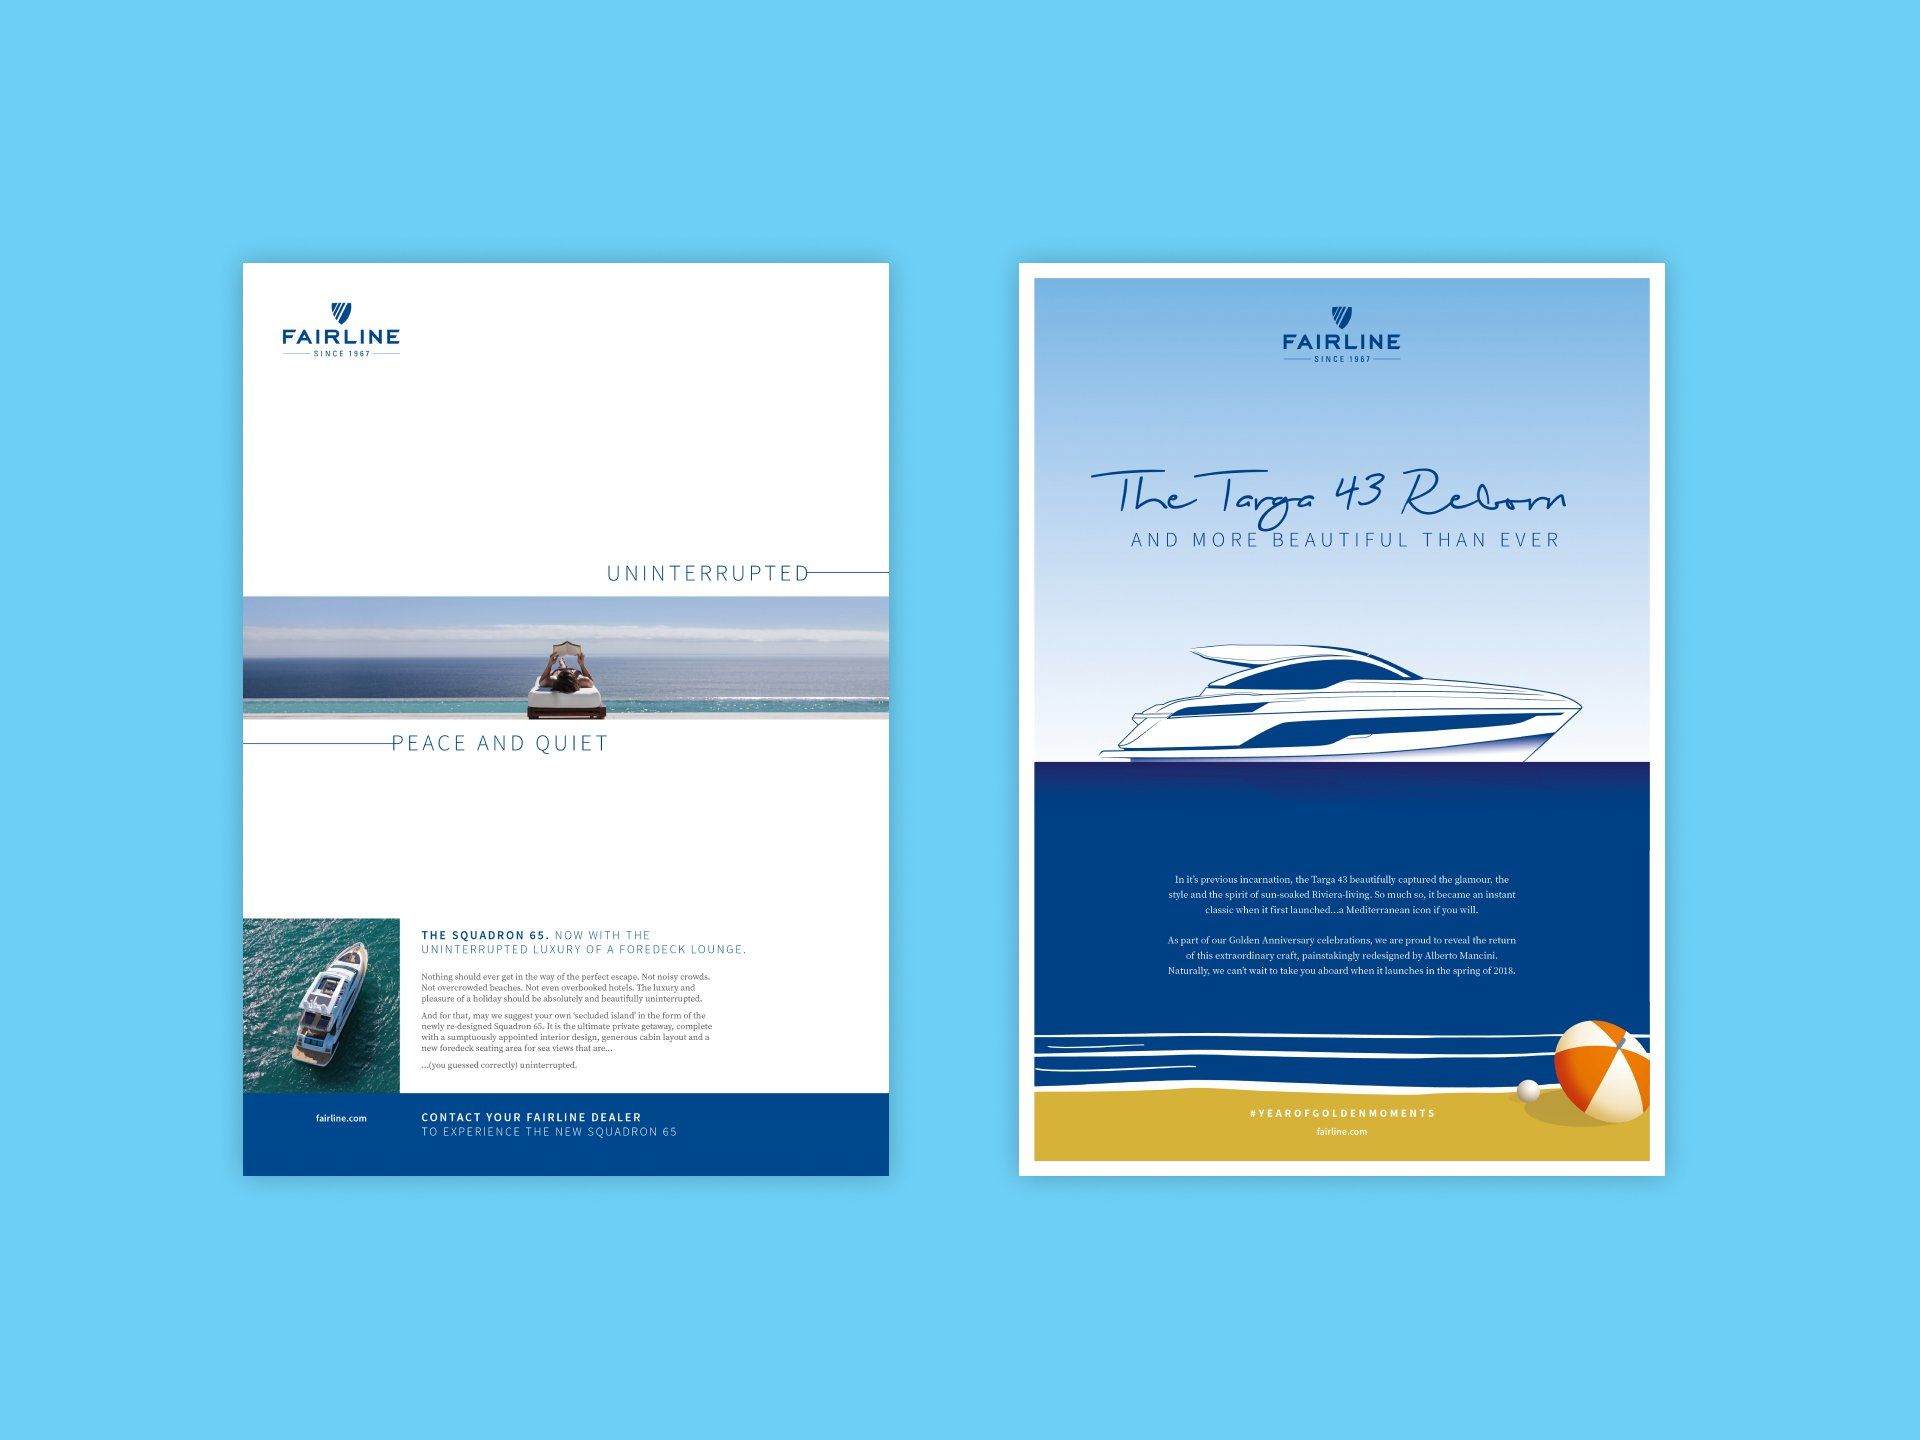 A selection of print adverts for various models of Fairline Yachts. © The Animo Group Ltd.